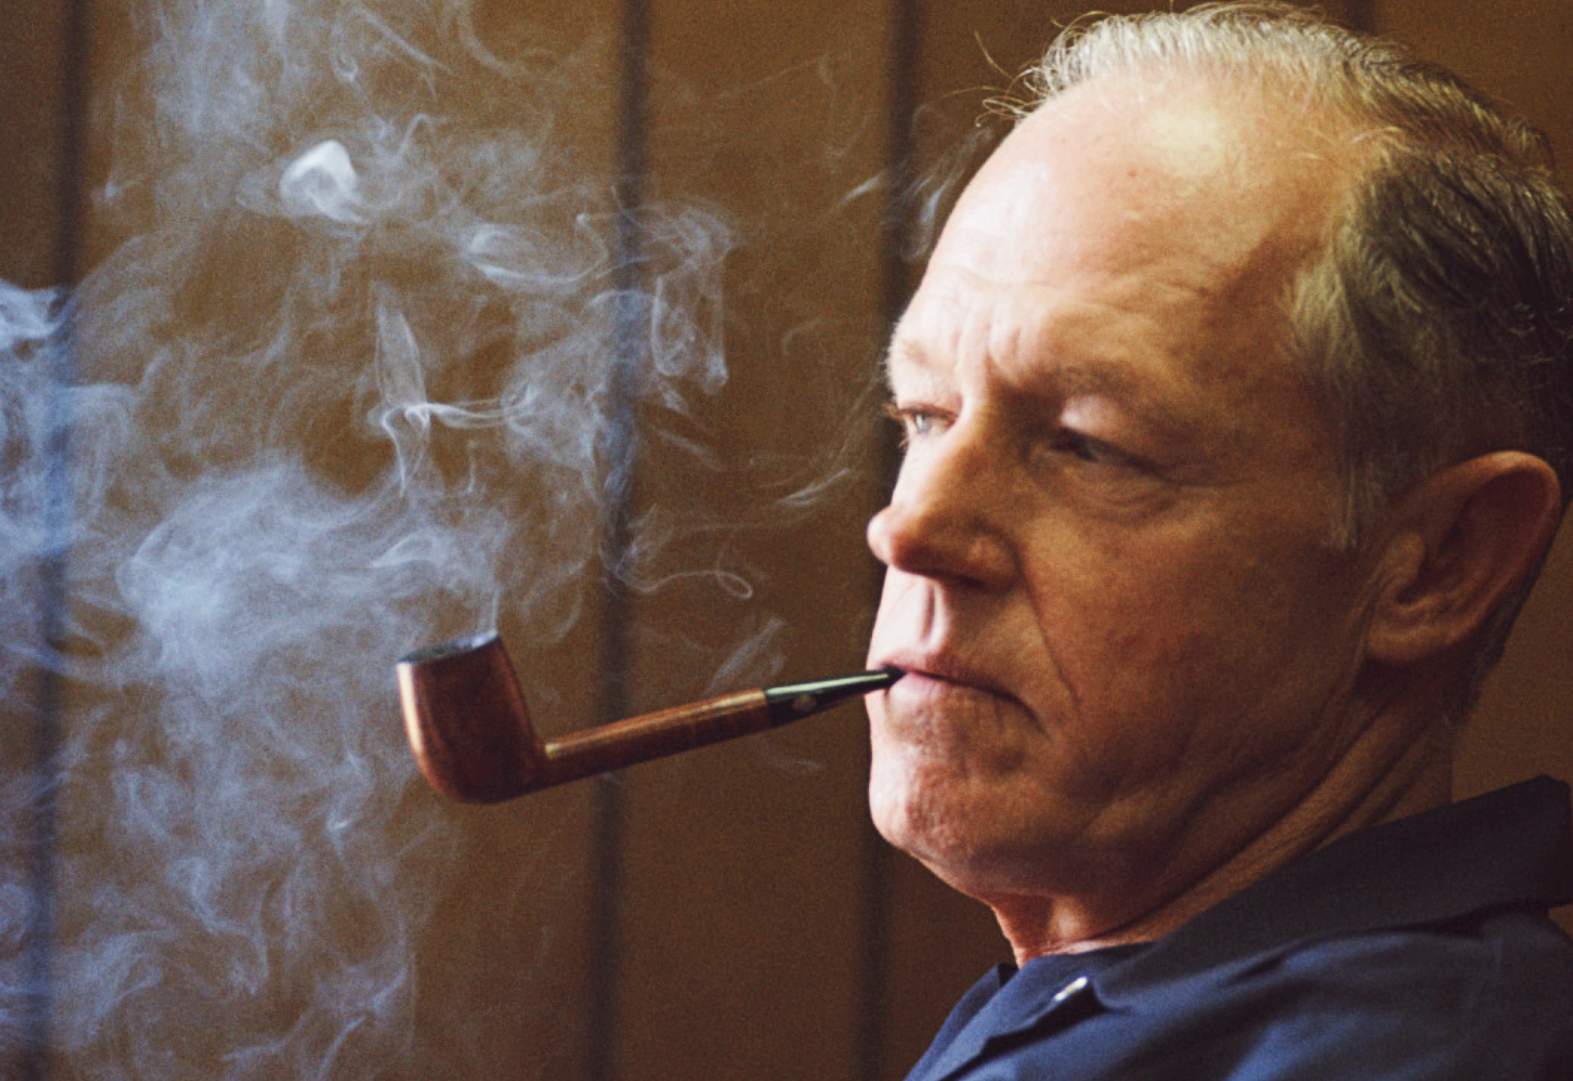 Pipe smoking Everette Howard Hunt oversaw secret operations including the infamous Watergate break-in and a bumbling CIA plan to create an American 007 to rival James Bond.